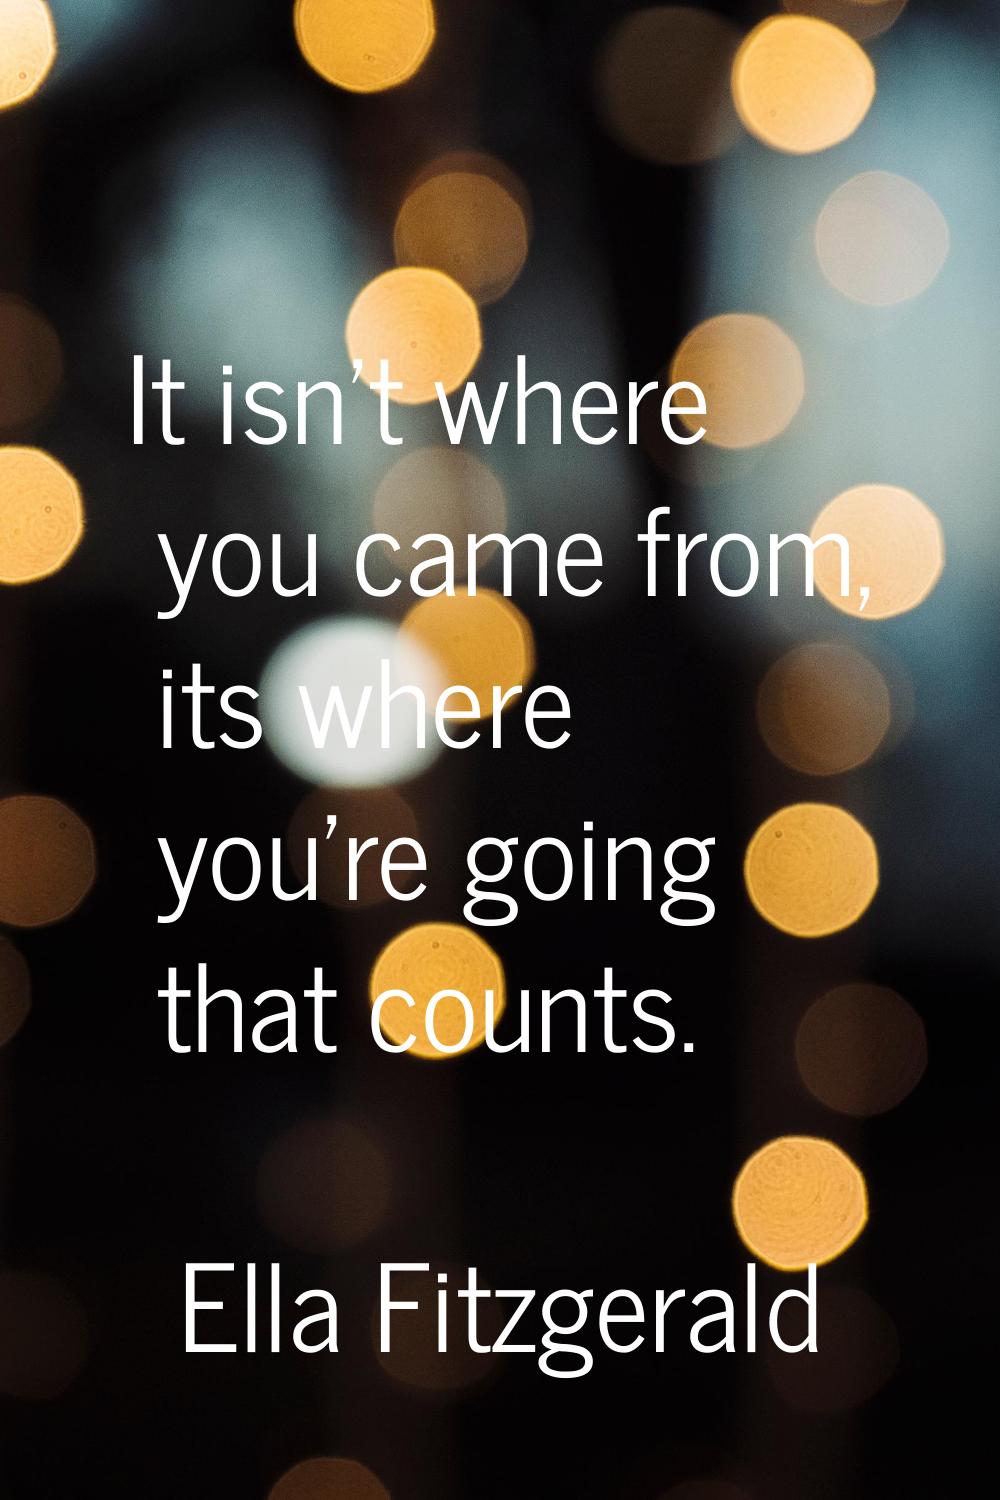 It isn't where you came from, its where you're going that counts.